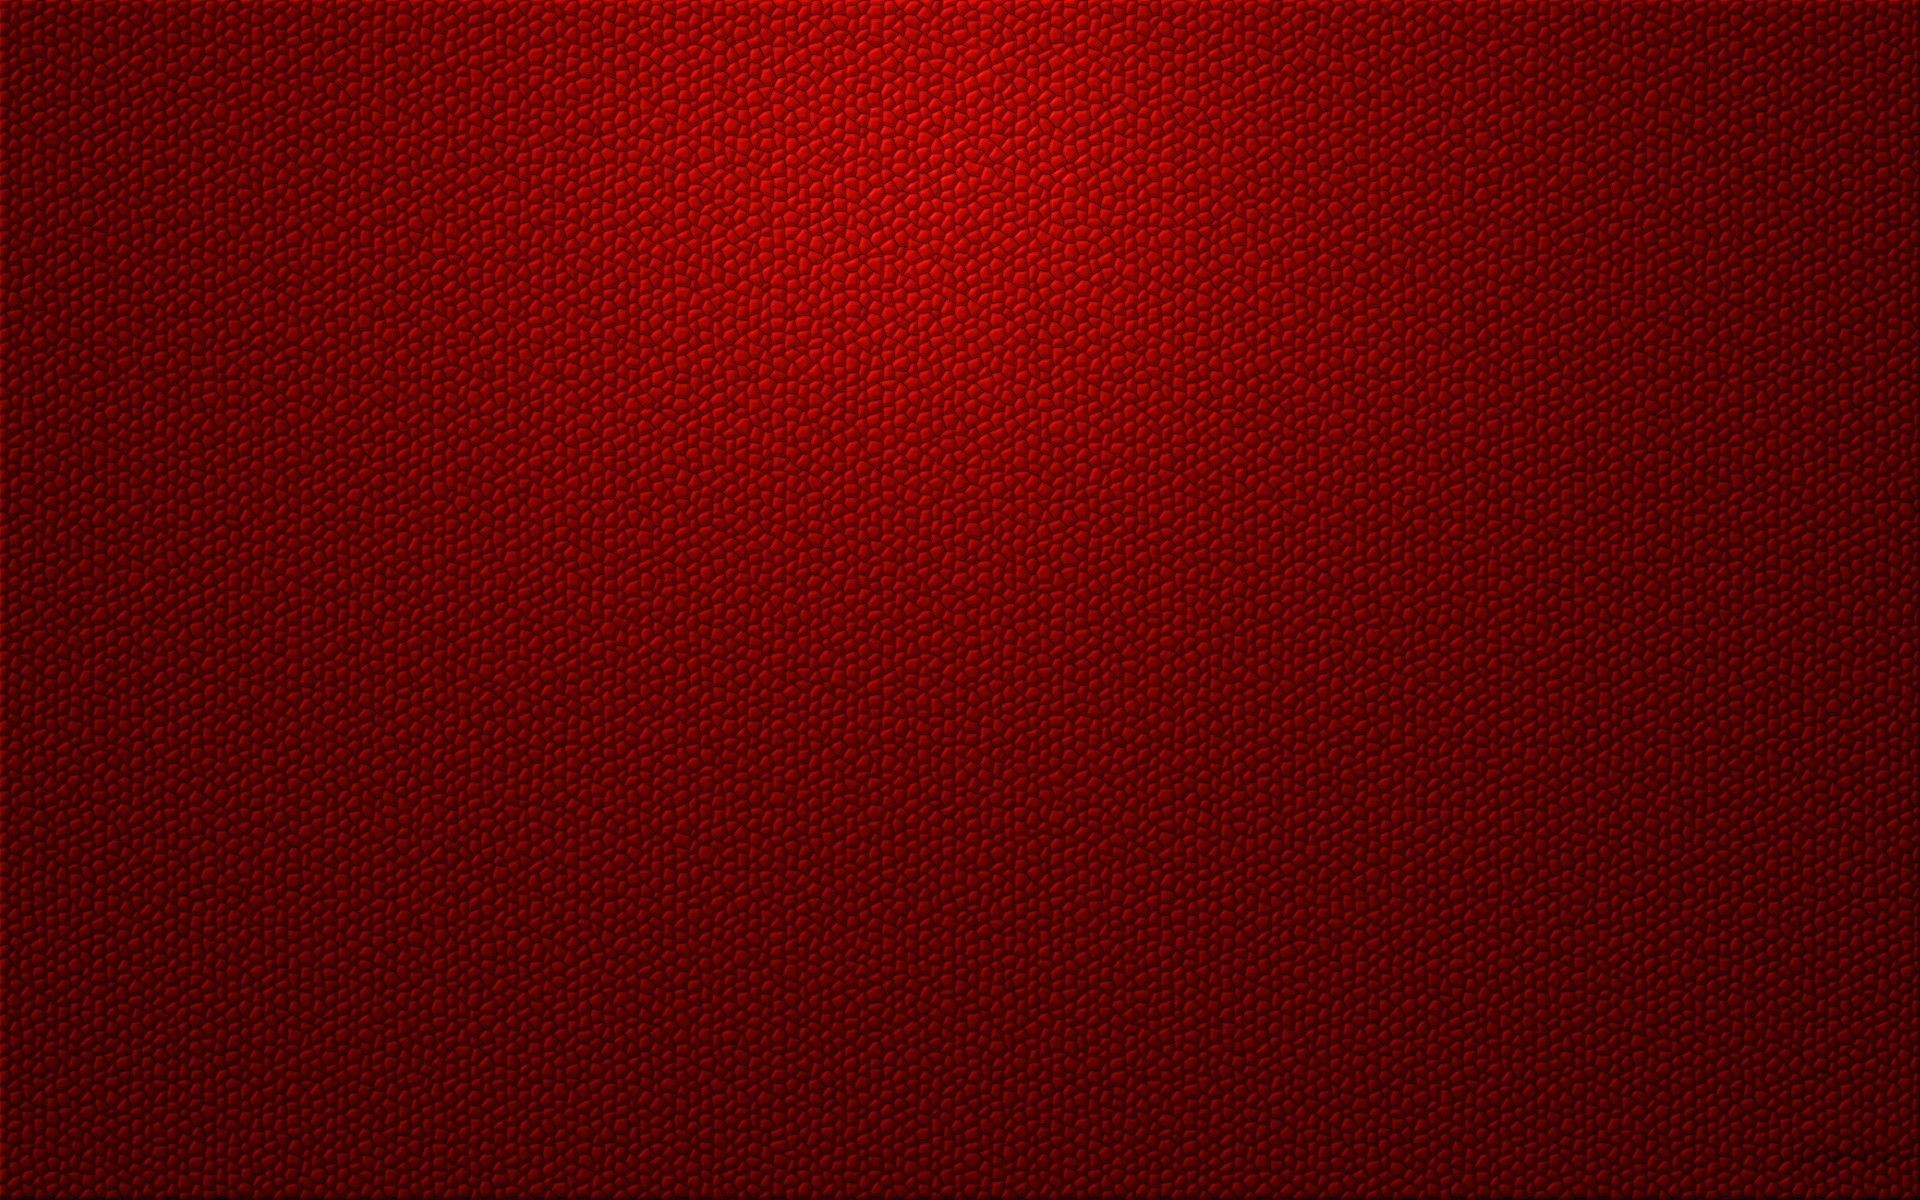 1920x1200 Red 1920 x 1200 HD Wallpapers